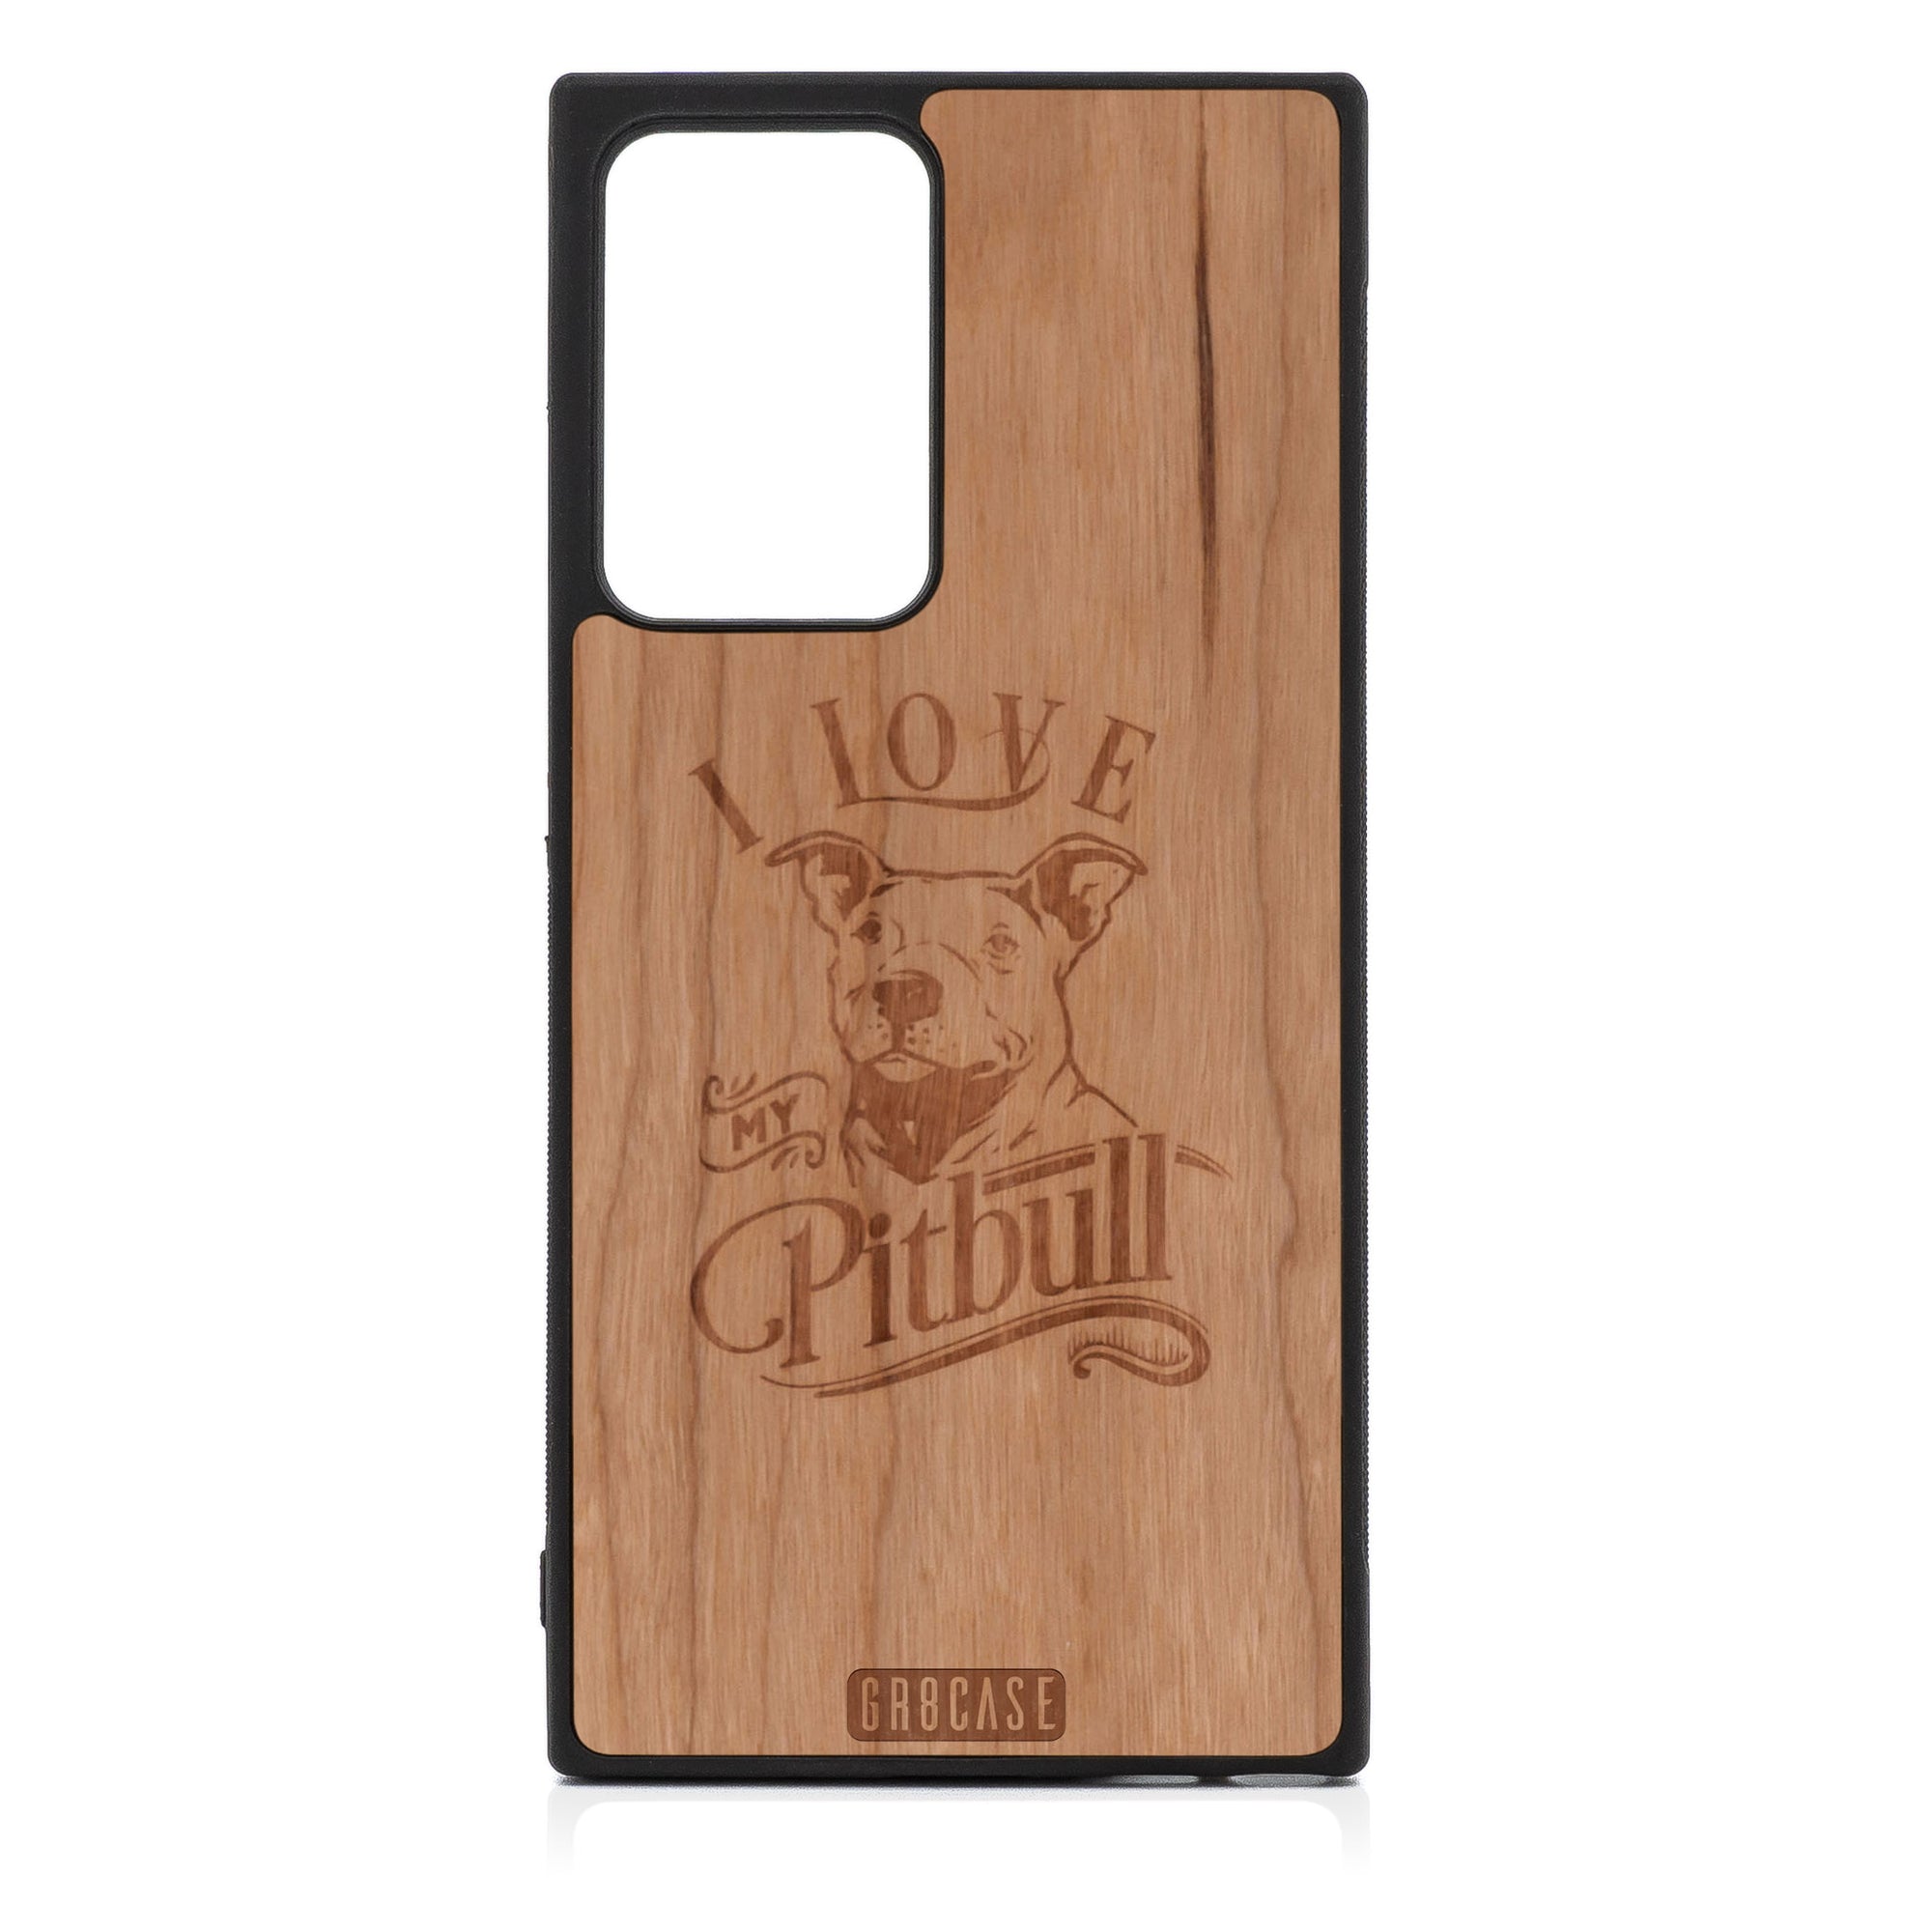 I Love My Pitbull Design Wood Case For Samsung Galaxy Note 20 Ultra